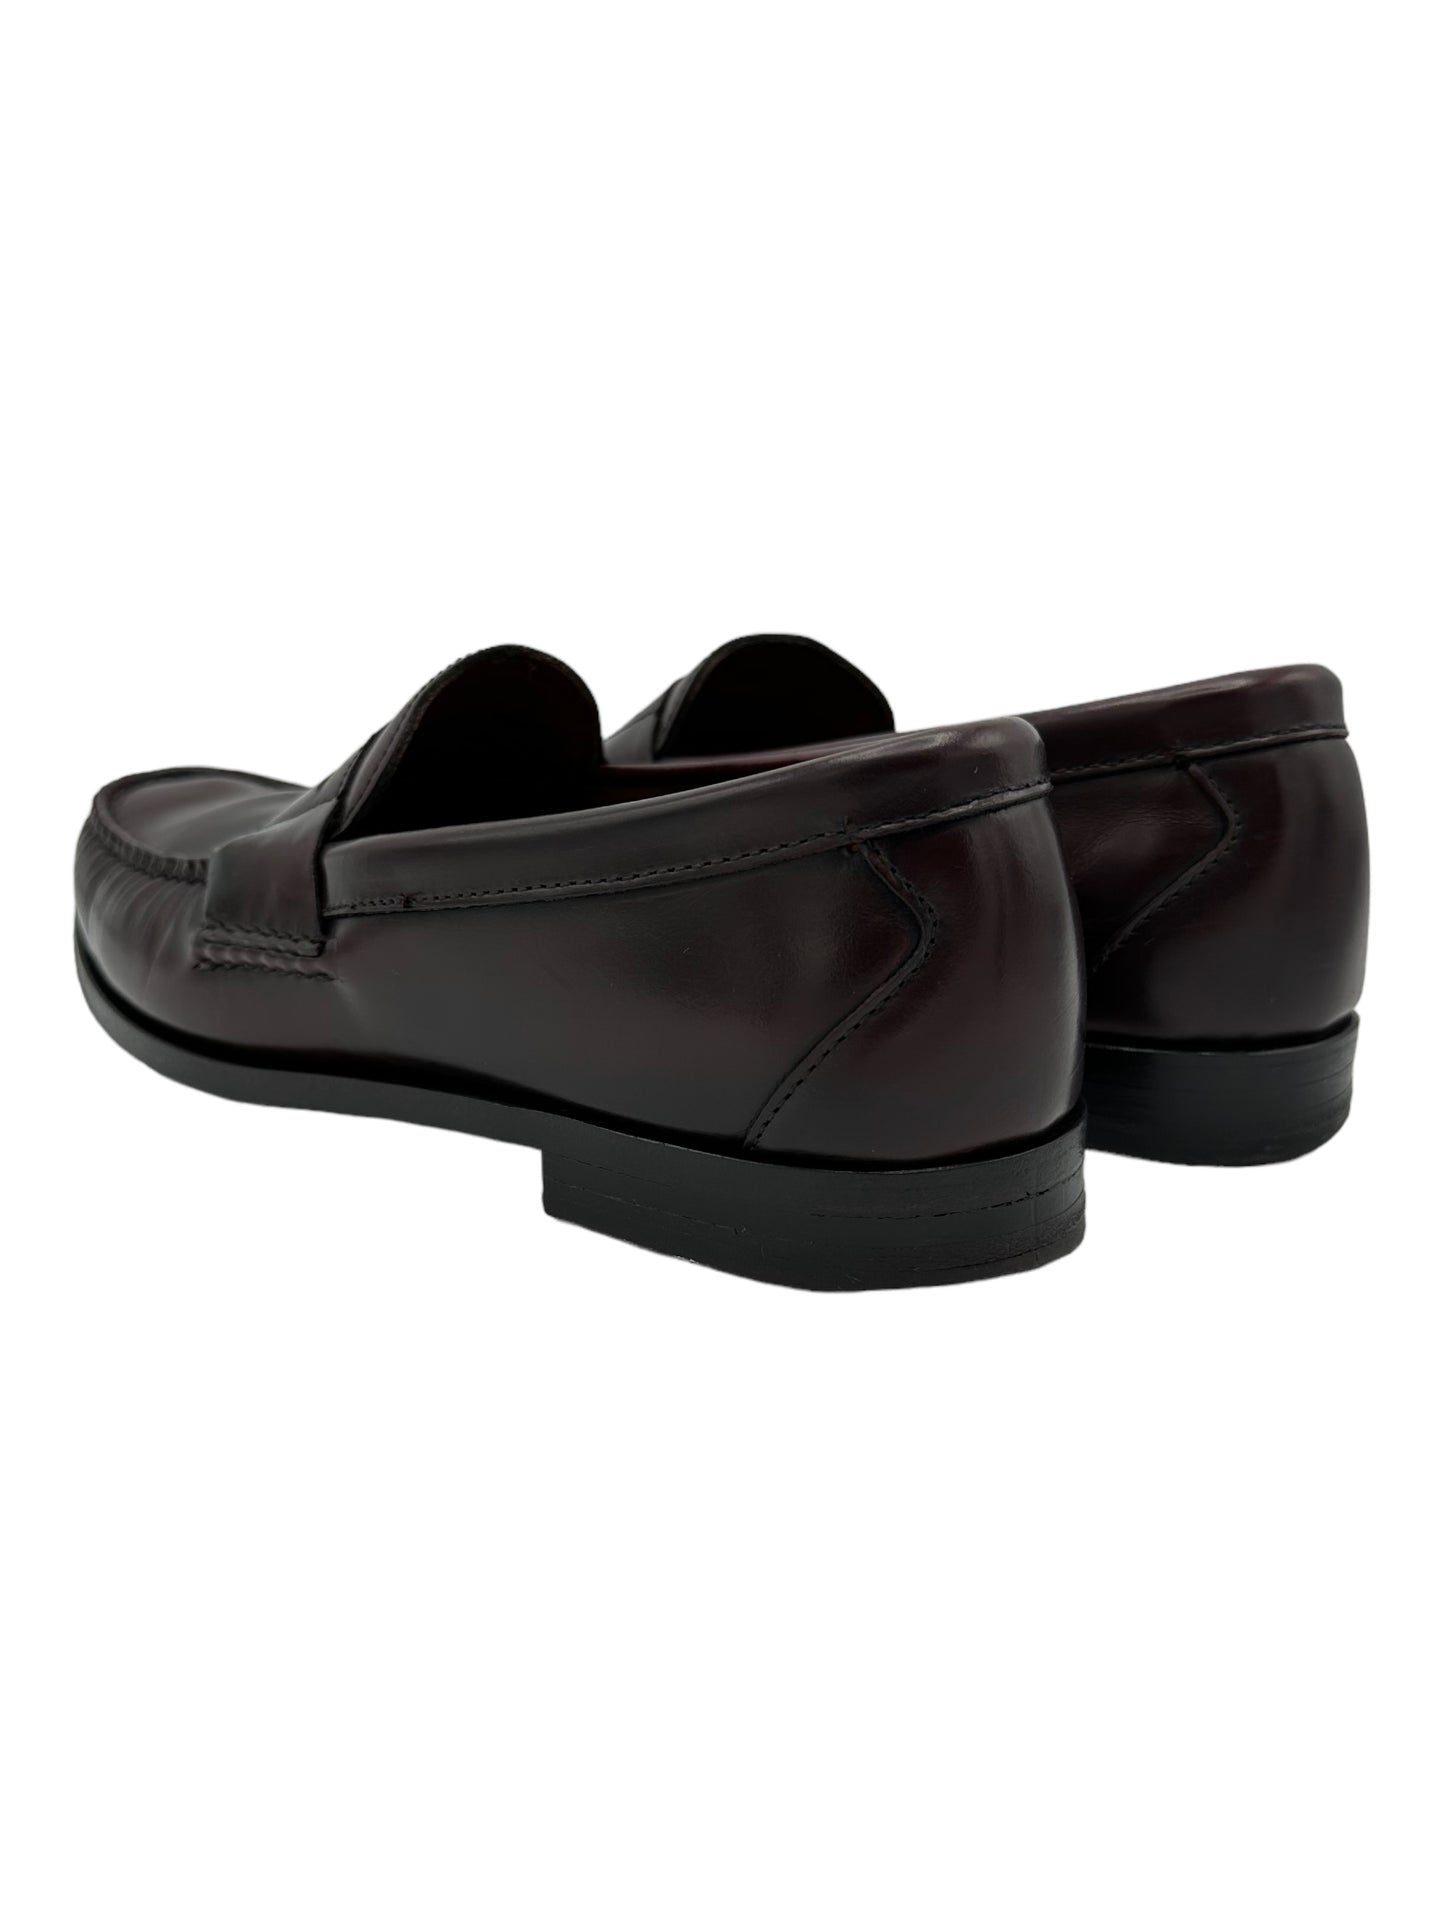 Allen Edmonds Newman Leather Penny Loafers